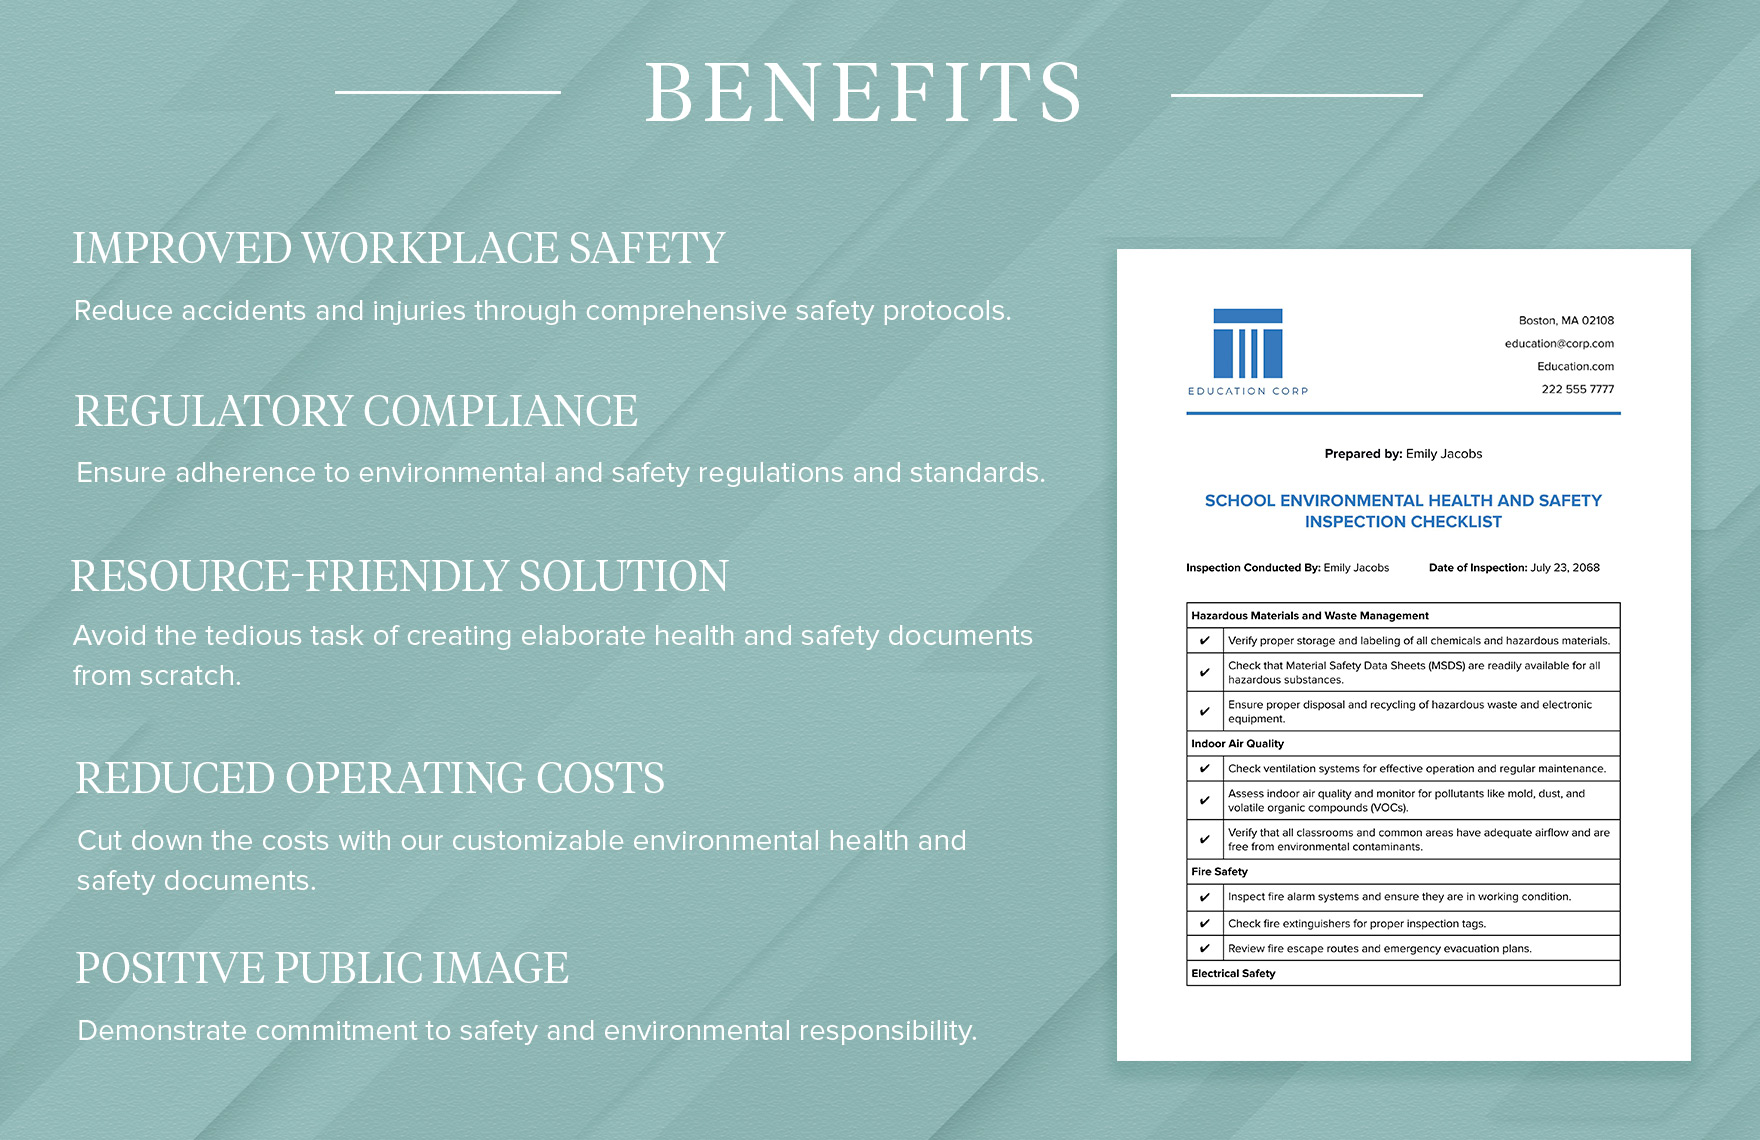 School Environmental Health and Safety Inspection Checklist Template